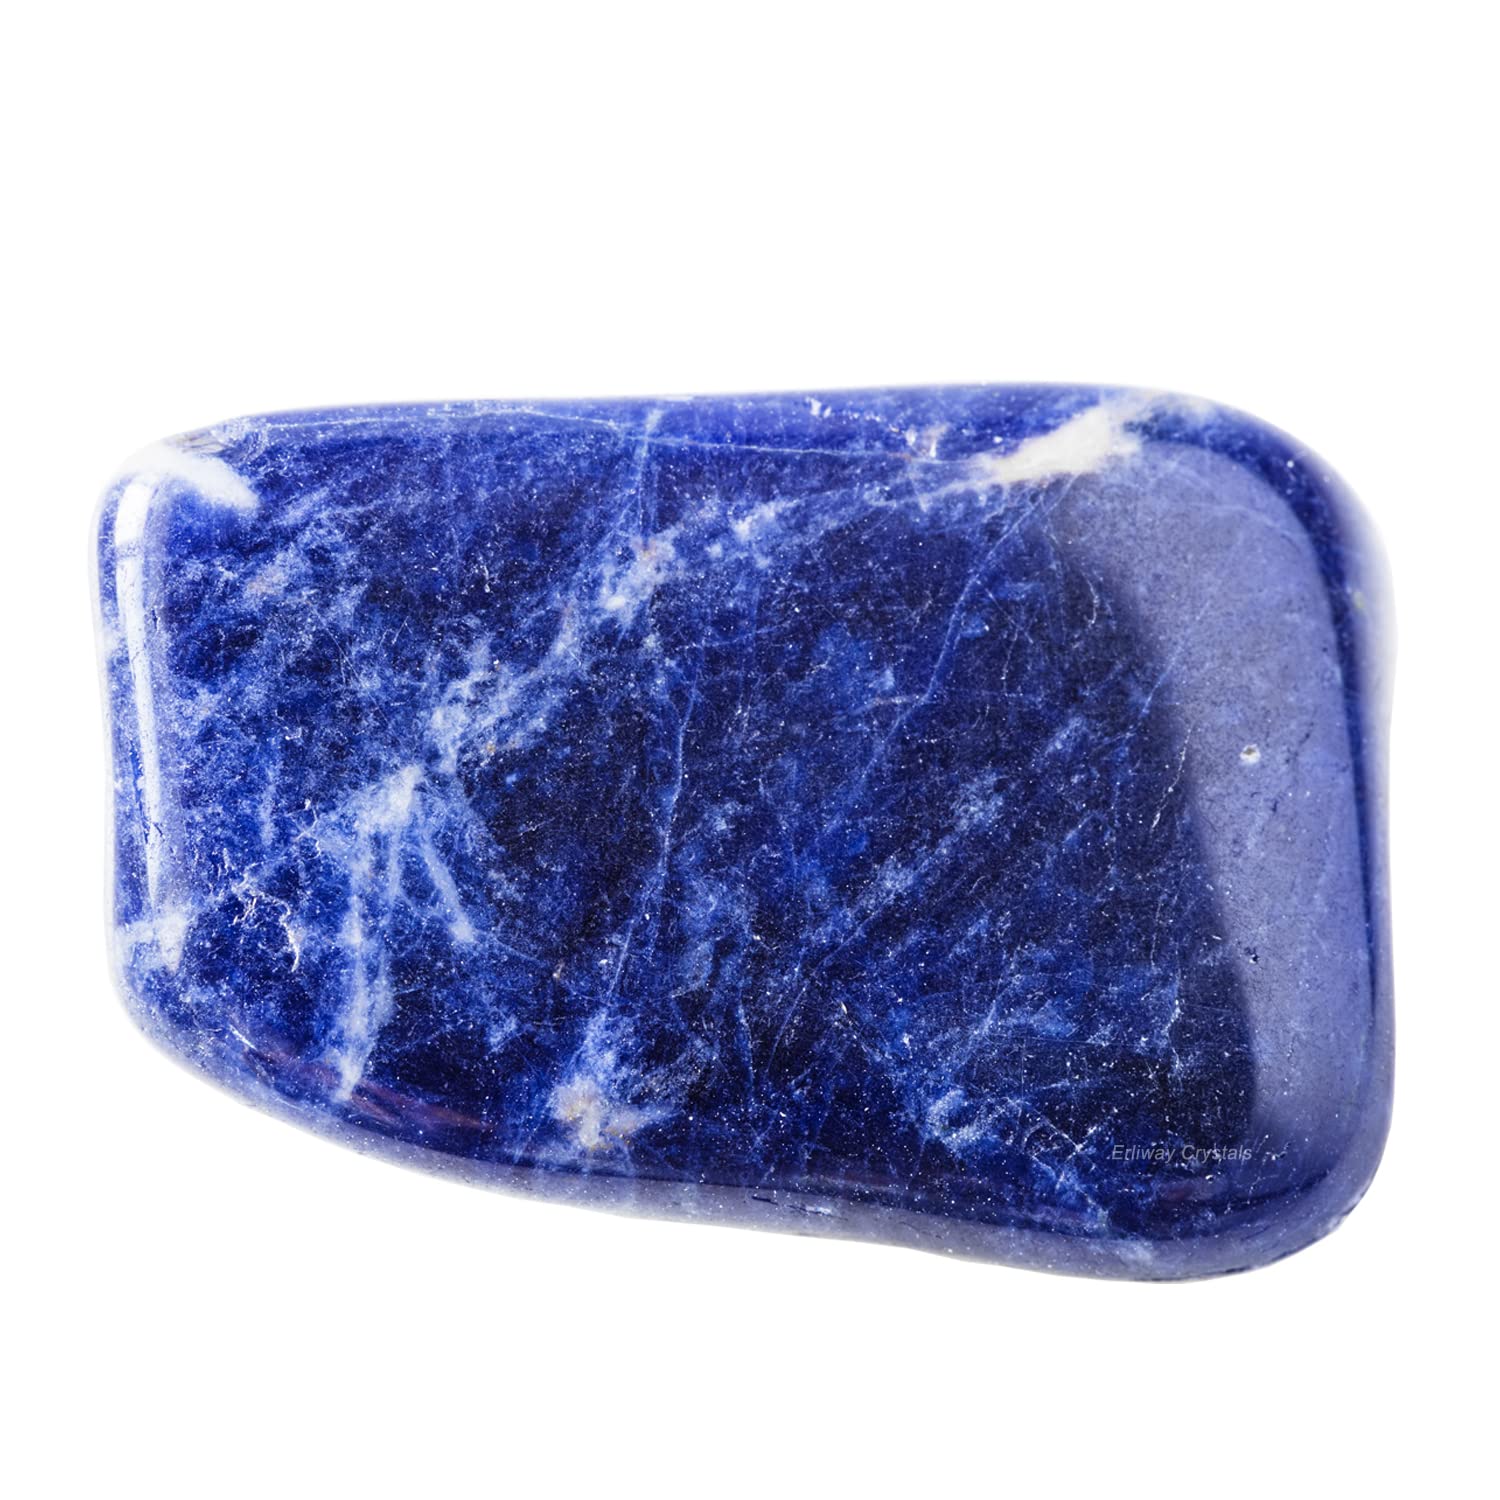 Sodalite Healing Crystal Stones 1.25-2.0 Large Reiki Healing Gemstones  Natural Tumbled Polished Stones for Energy Witchcraft Therapy Meditation